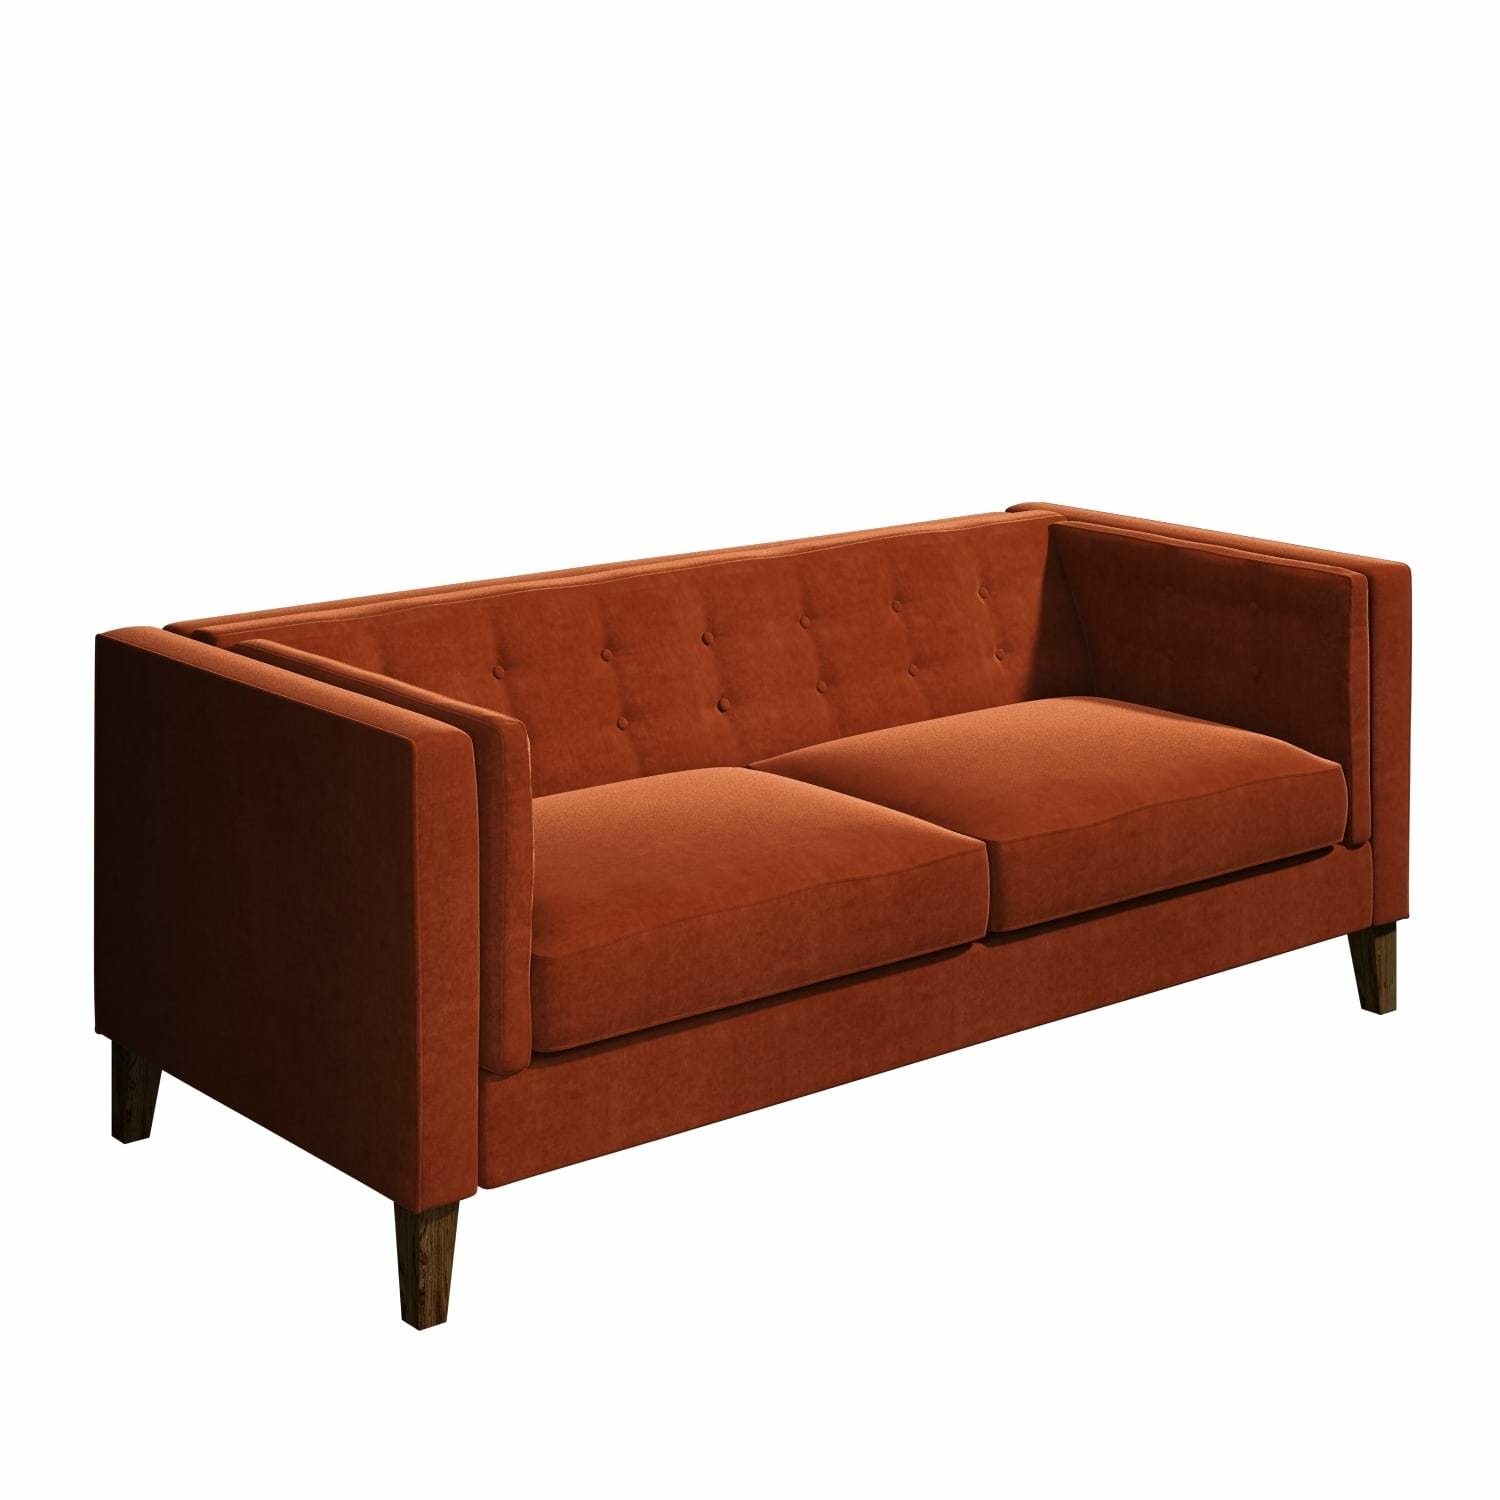 Orange Velvet Sofa with Squared Arms & Button Back  Seats 3  Bailey